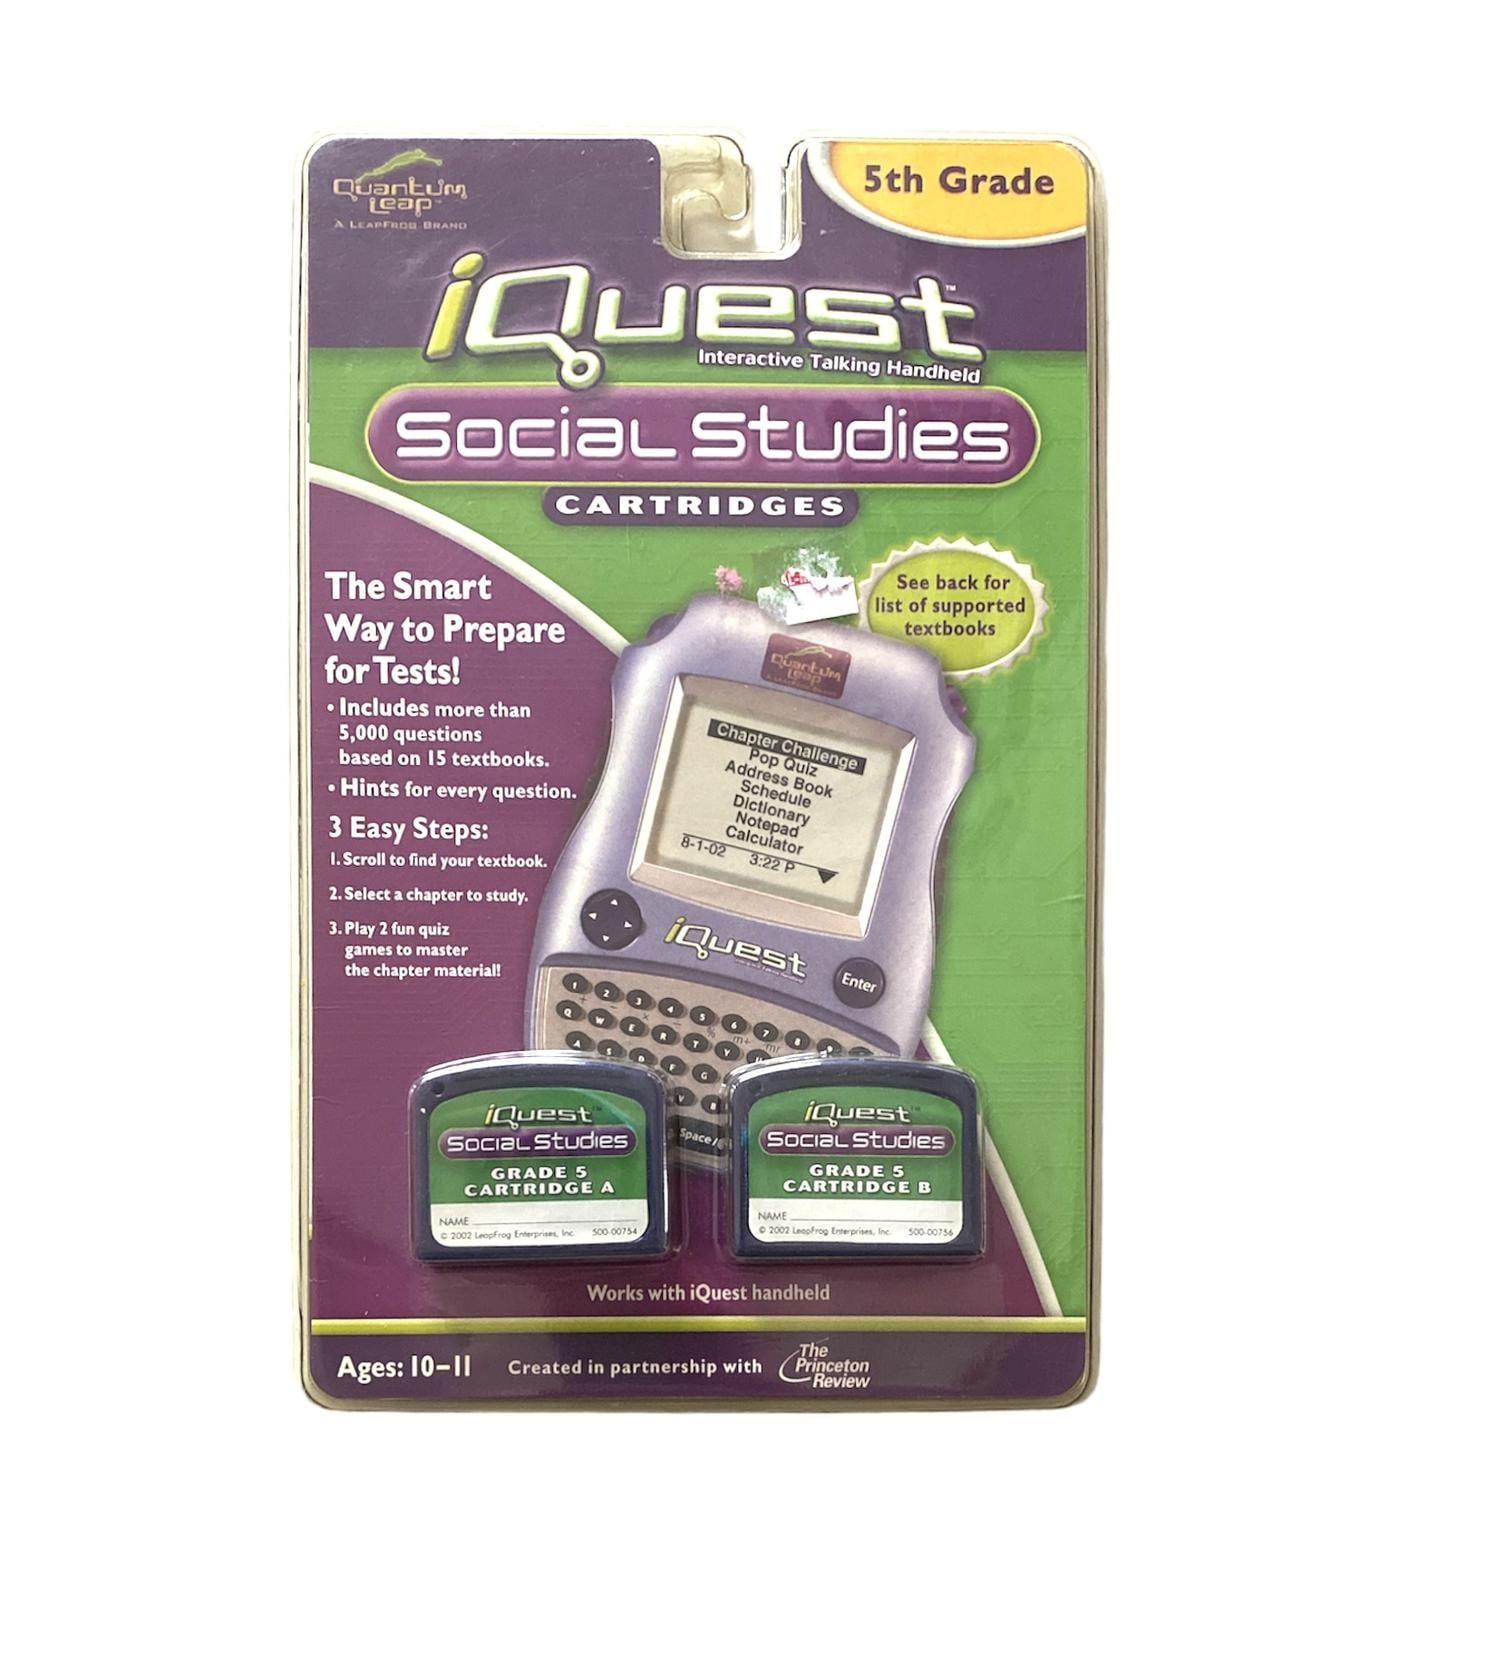 iquest cartridge: 5th grade social studies with one cartridge 